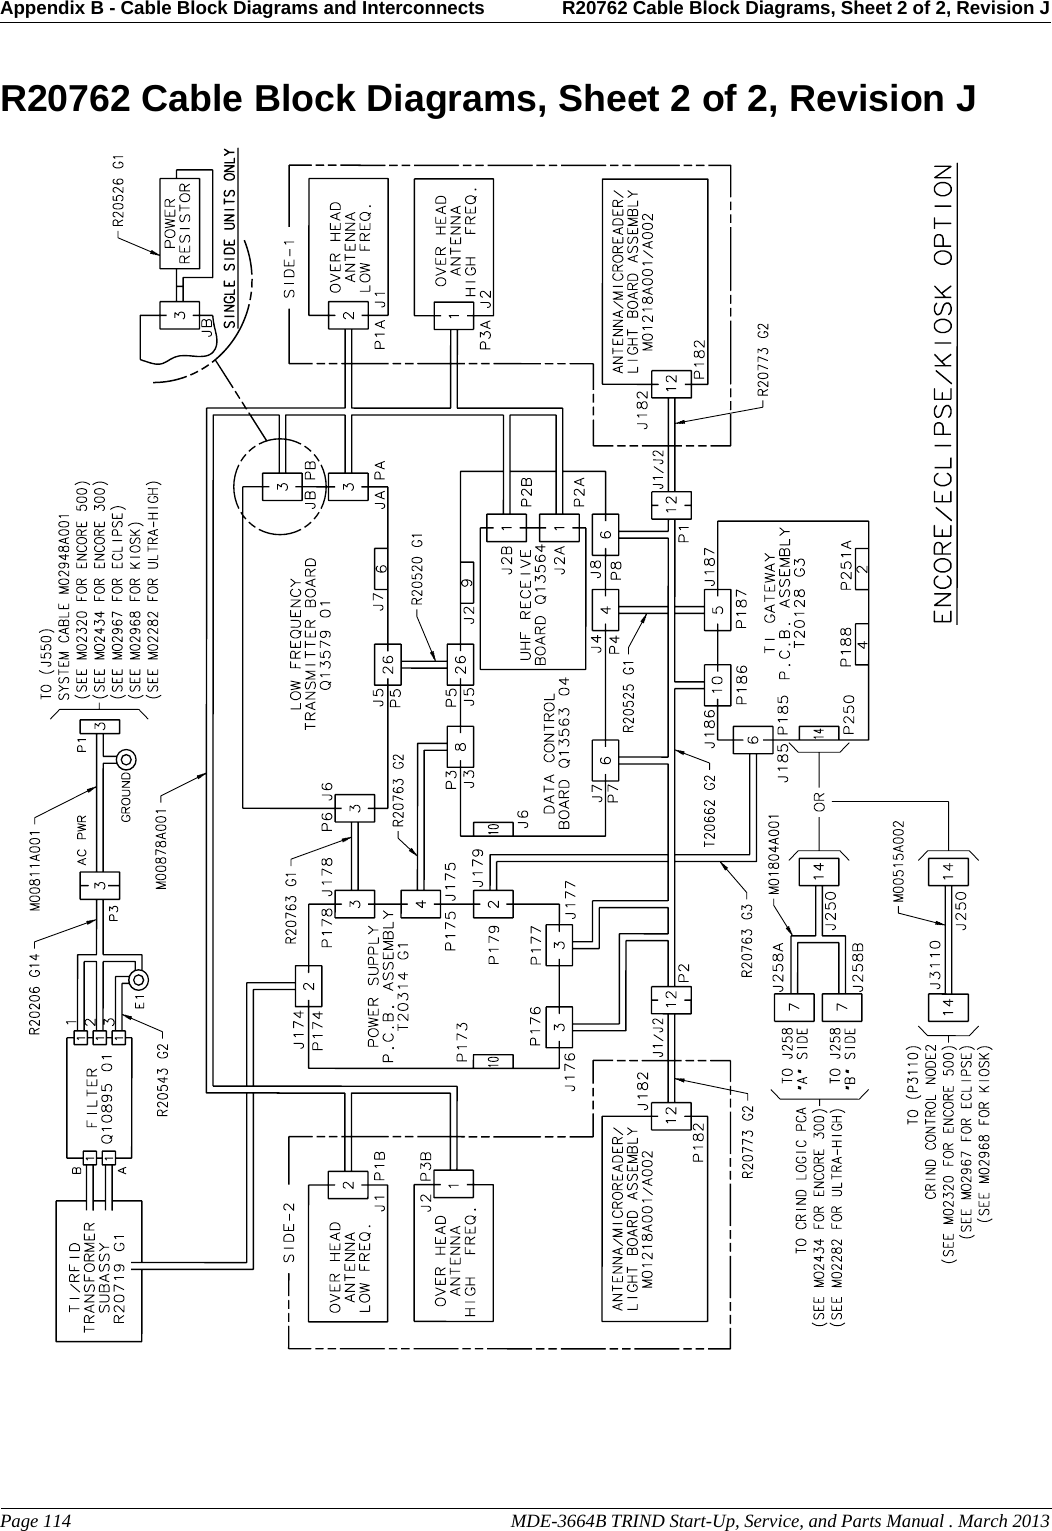 Appendix B - Cable Block Diagrams and Interconnects R20762 Cable Block Diagrams, Sheet 2 of 2, Revision JPage 114                                                                                                  MDE-3664B TRIND Start-Up, Service, and Parts Manual . March 2013PreliminaryR20762 Cable Block Diagrams, Sheet 2 of 2, Revision J